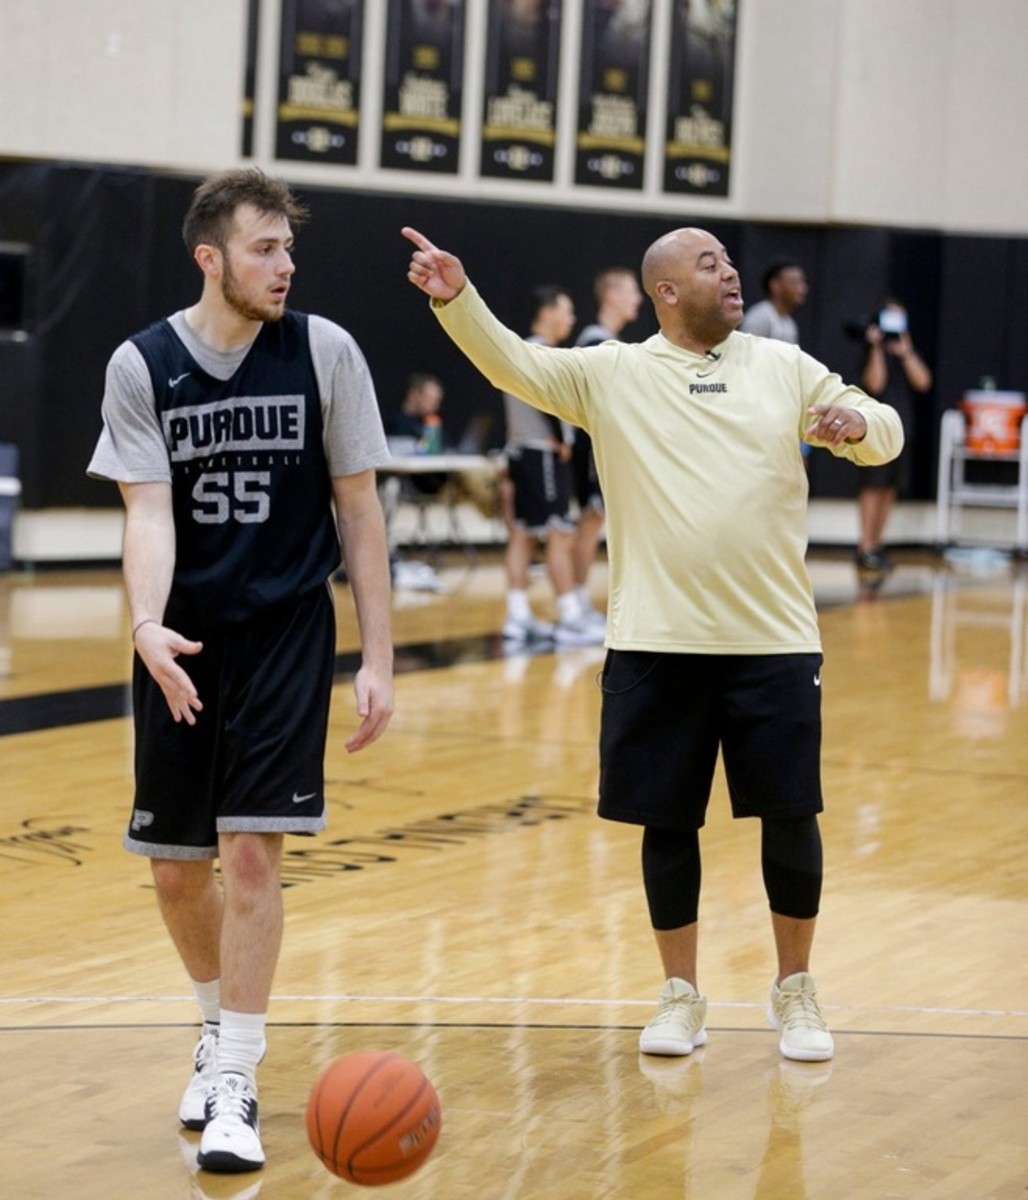 Purdue associate head coach Micah Shrewsberry calls out a play as Purdue guard Sasha Stefanovic (55) passes the ball during a basketball practice in 2019. (Nikos Frazier/USA TODAY Sports) 